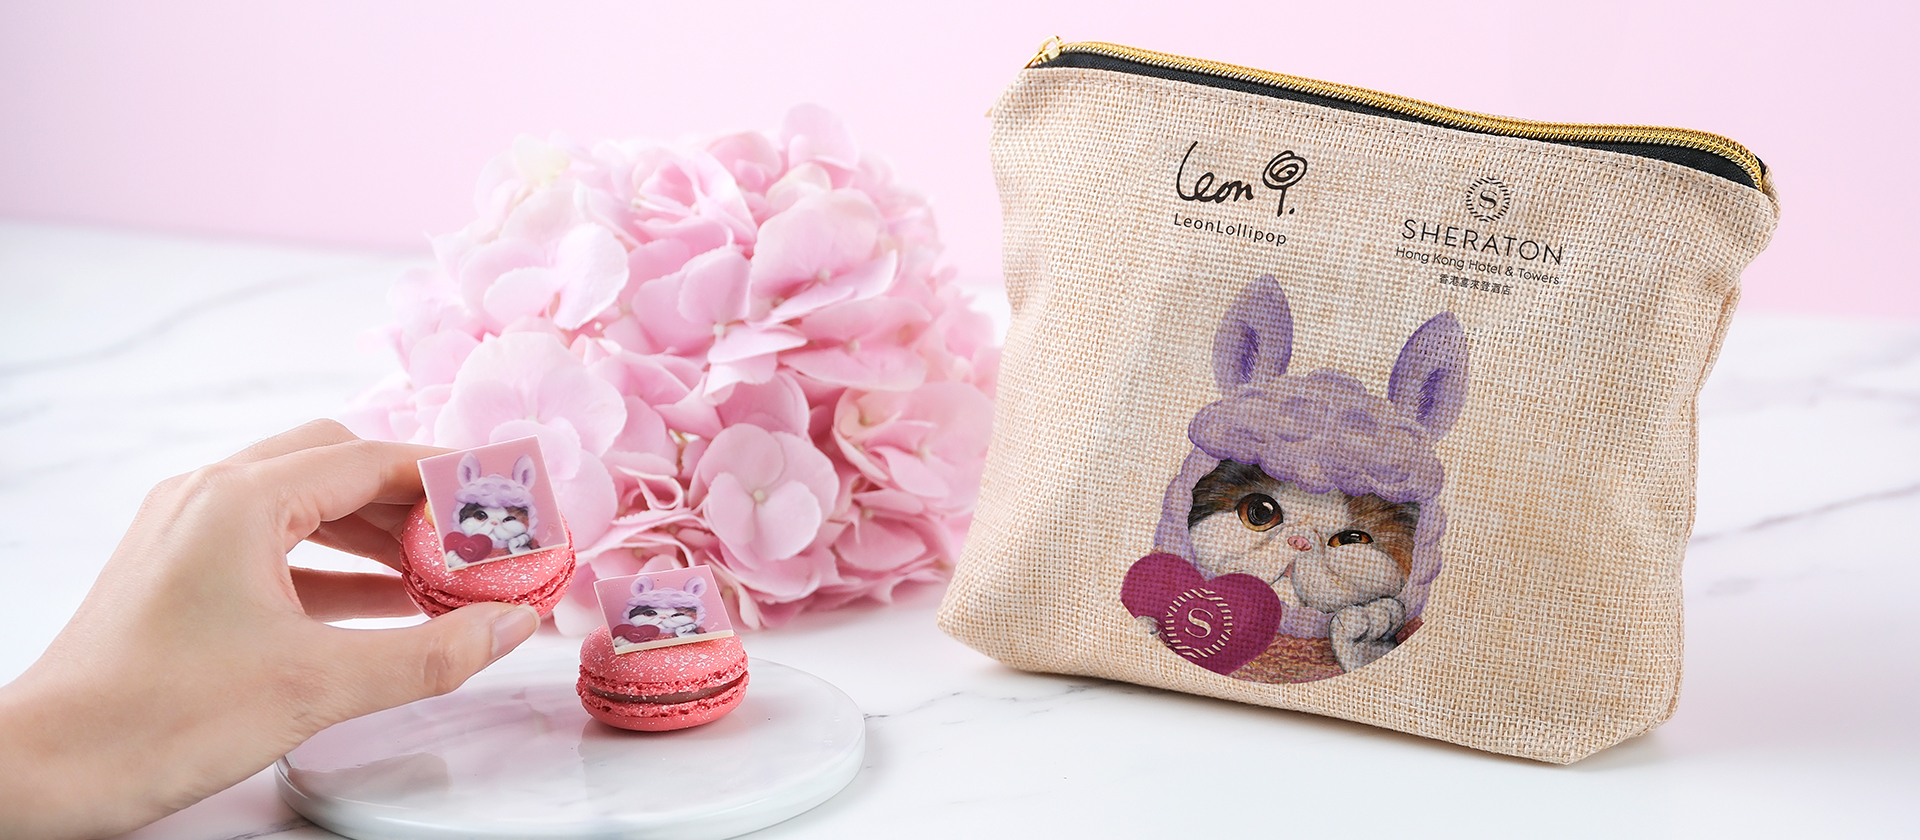 Sky Lounge x LeonLollipop 
The “Purrfect” Afternoon Tea
Exclusive 25% savings for afternoon tea